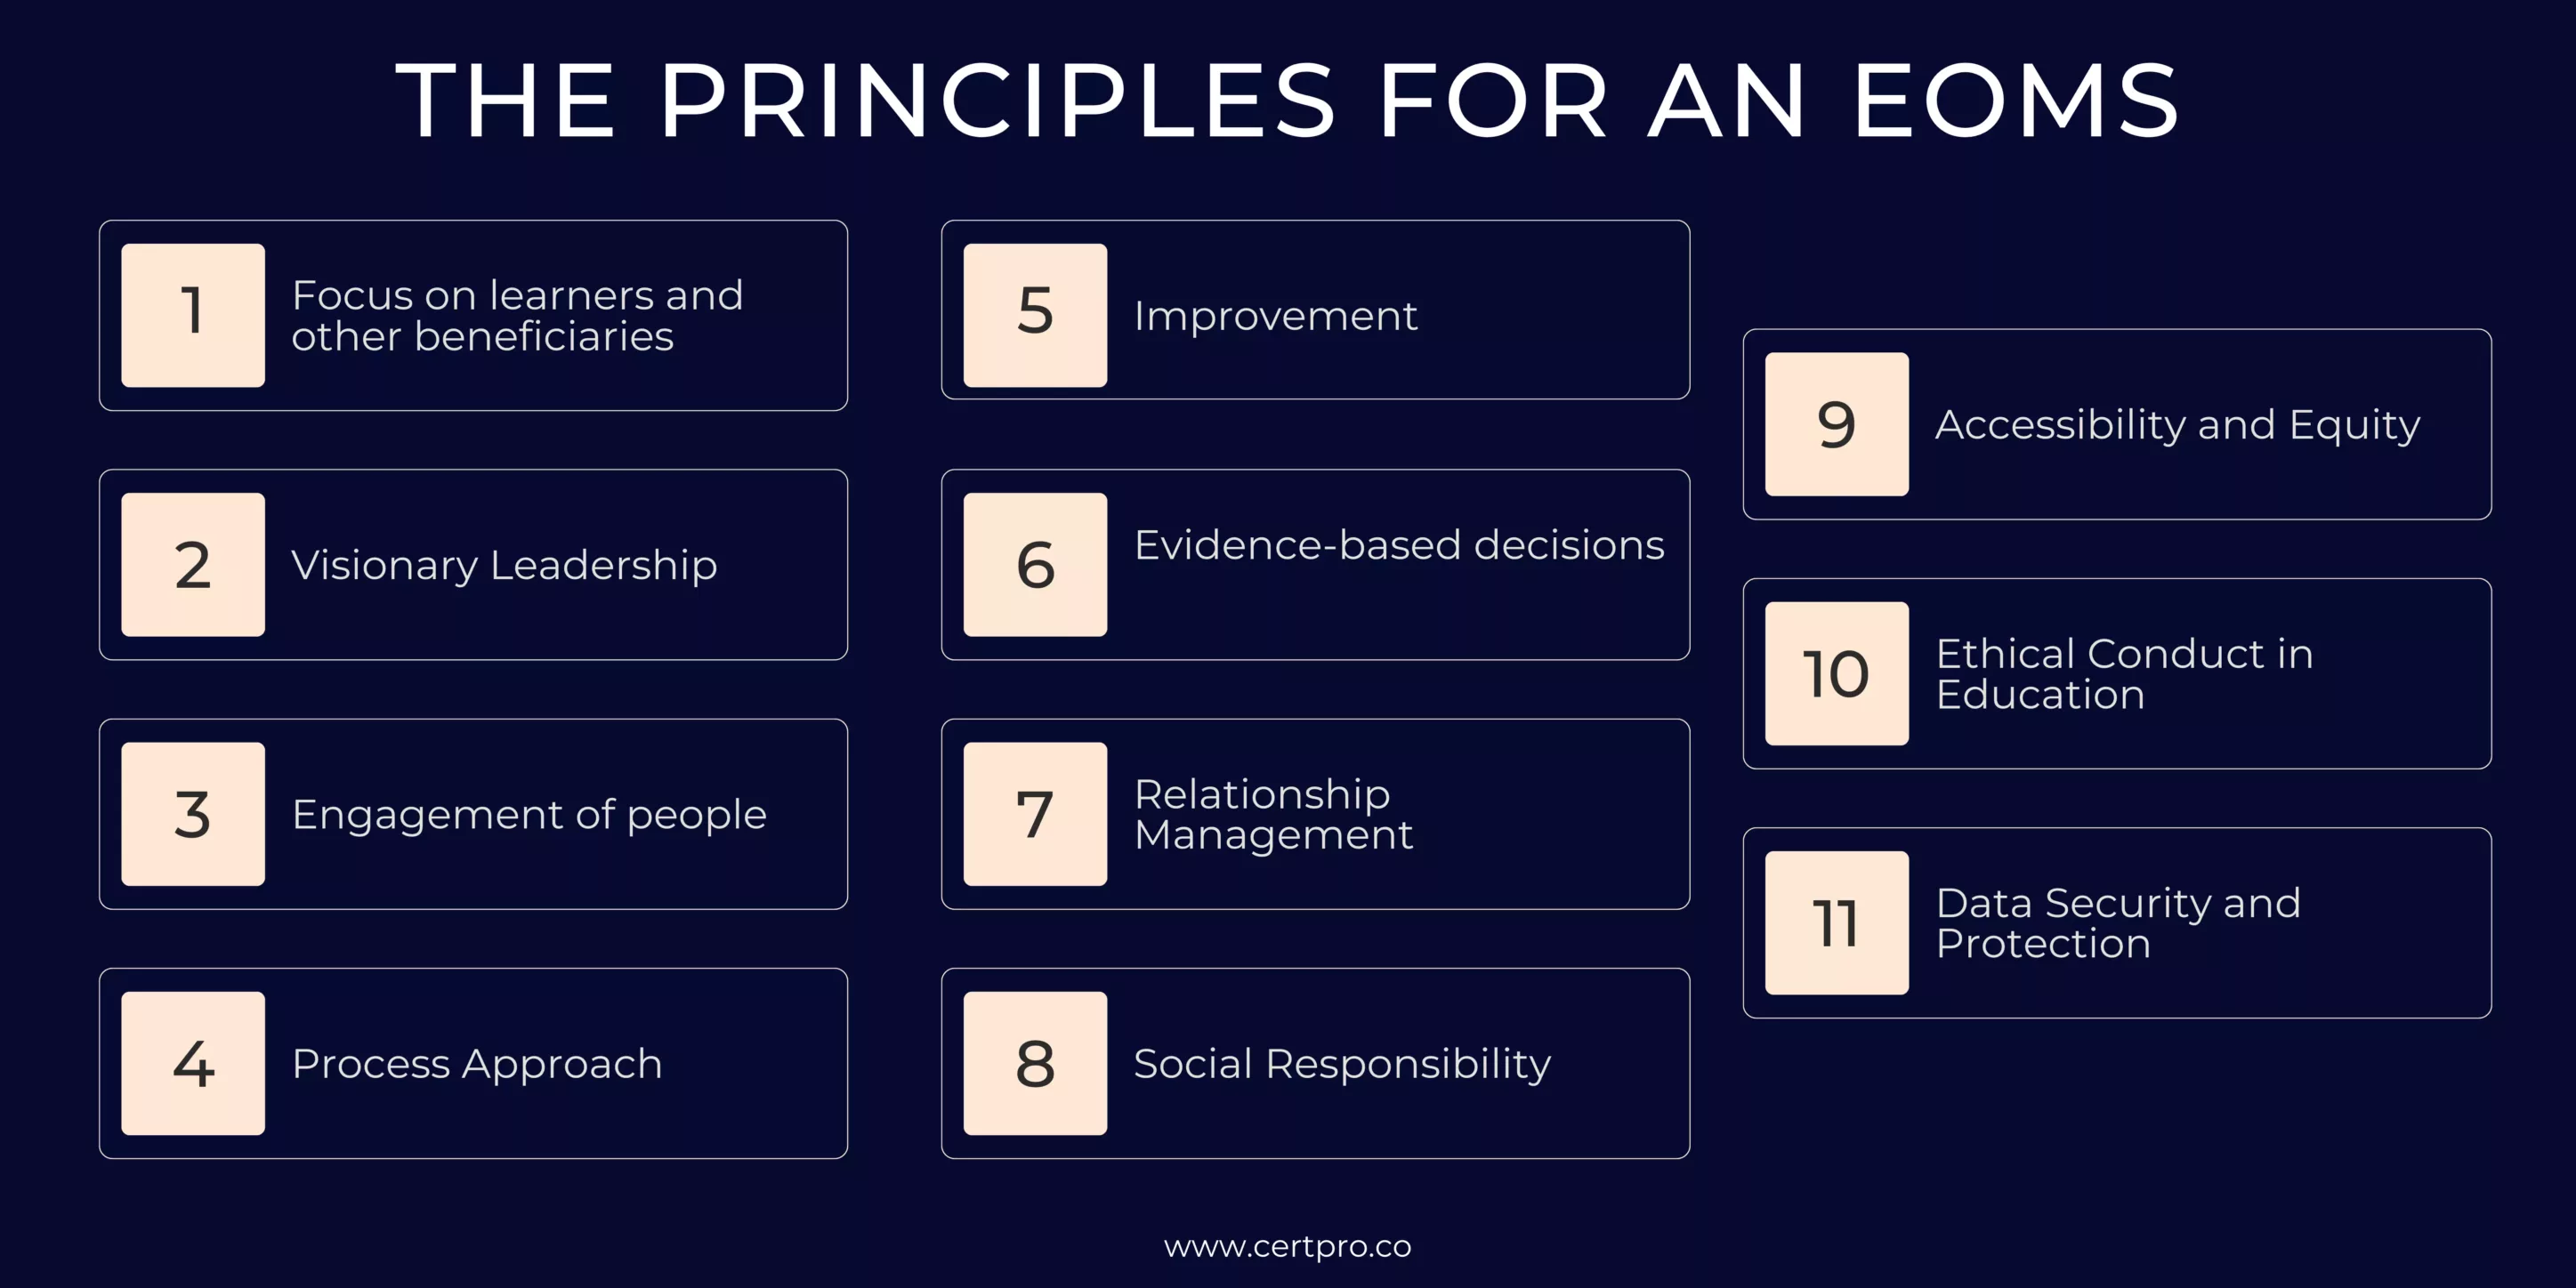 PRINCIPLES FOR AN EOMS